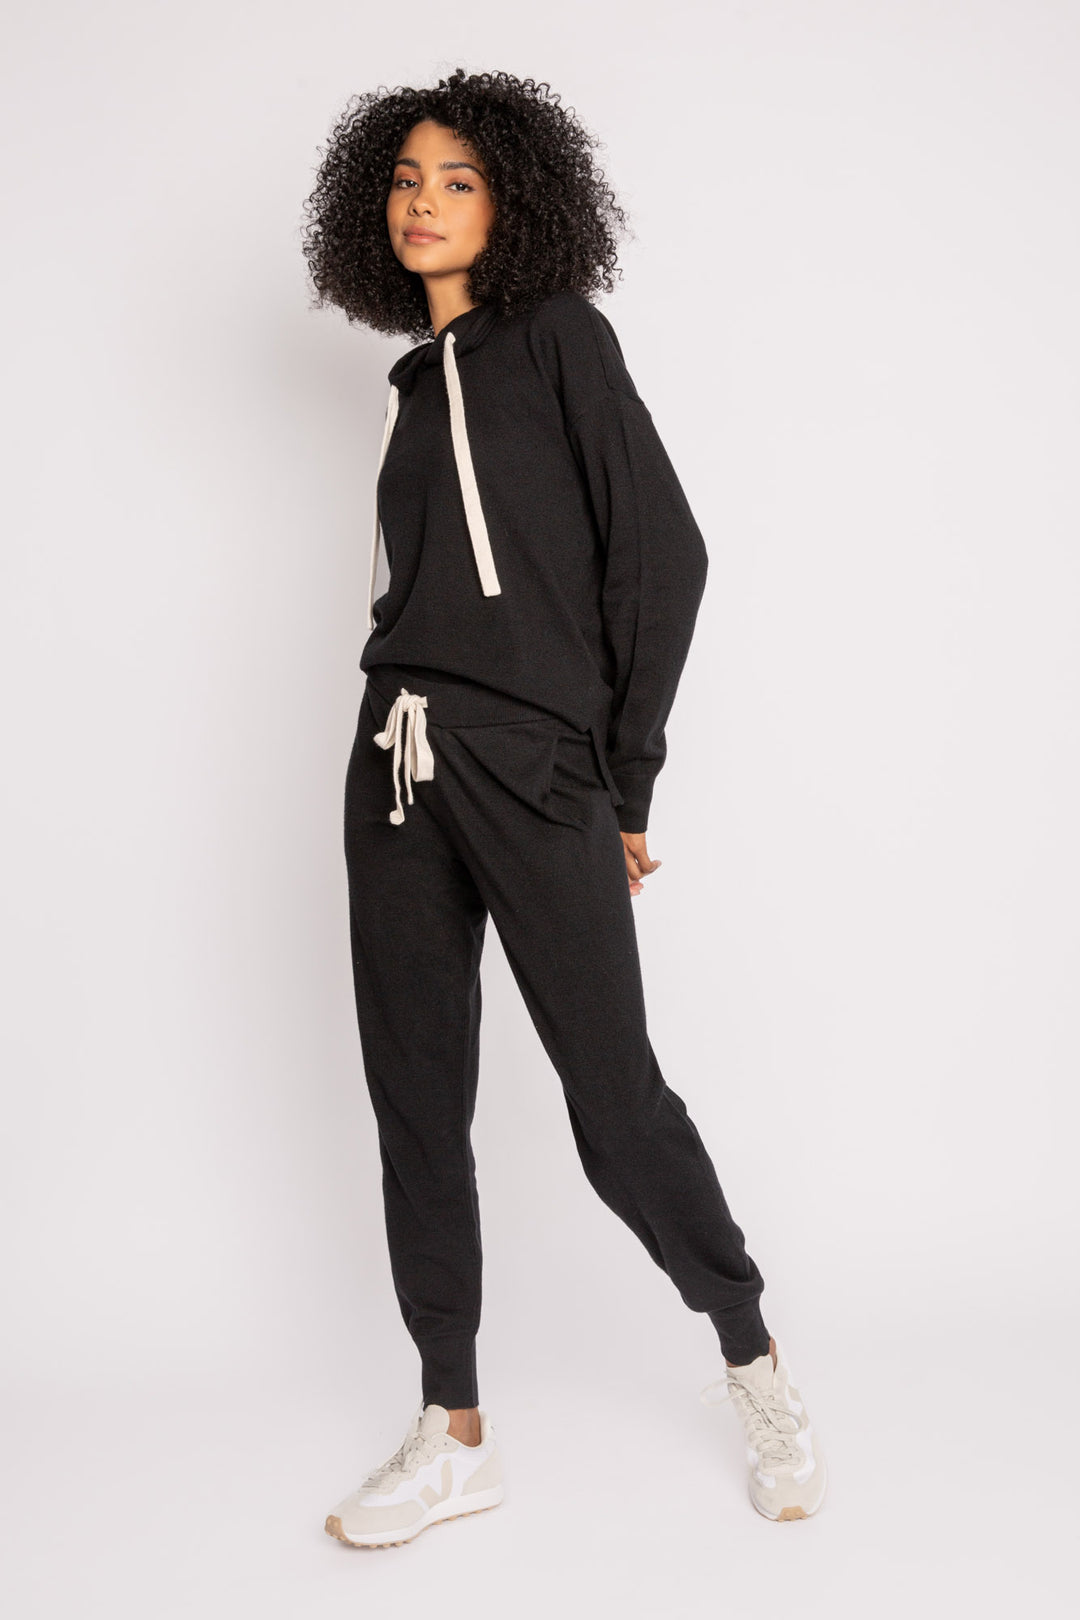 Black sweater knit lounge set hoody & high-waisted pant with contrast ivory drawcords. (7231885475940)